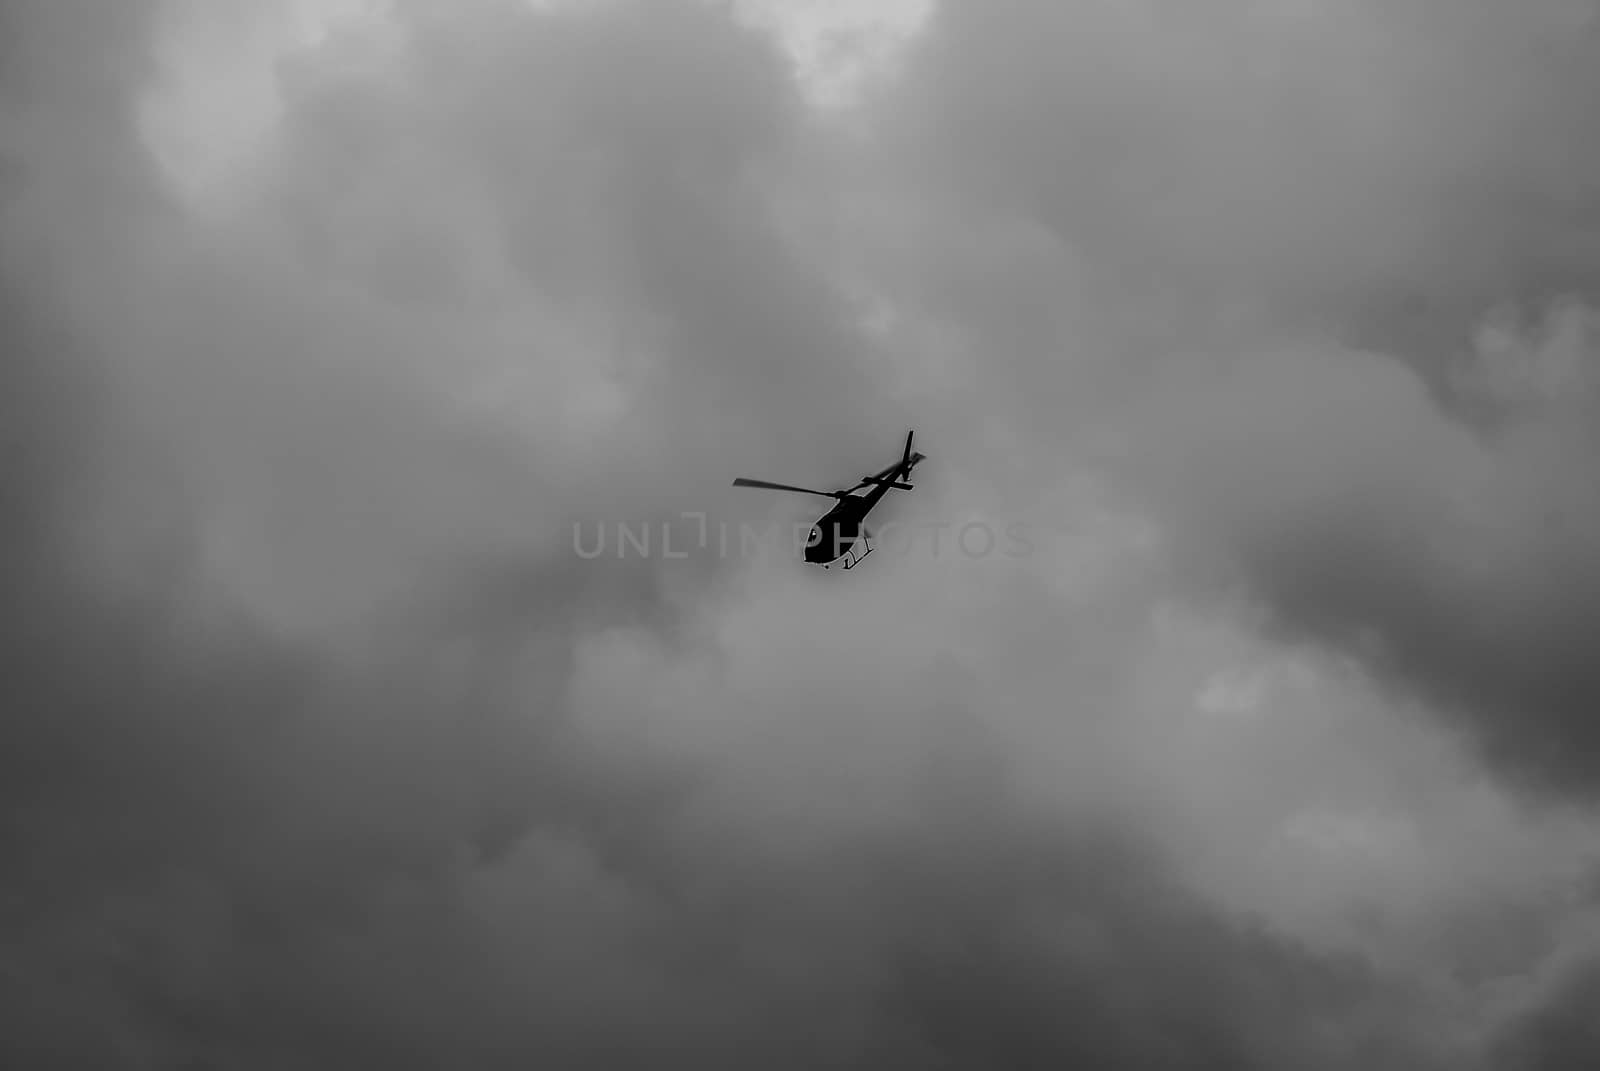 One single helicopter silhouette in front of clouds in the sky